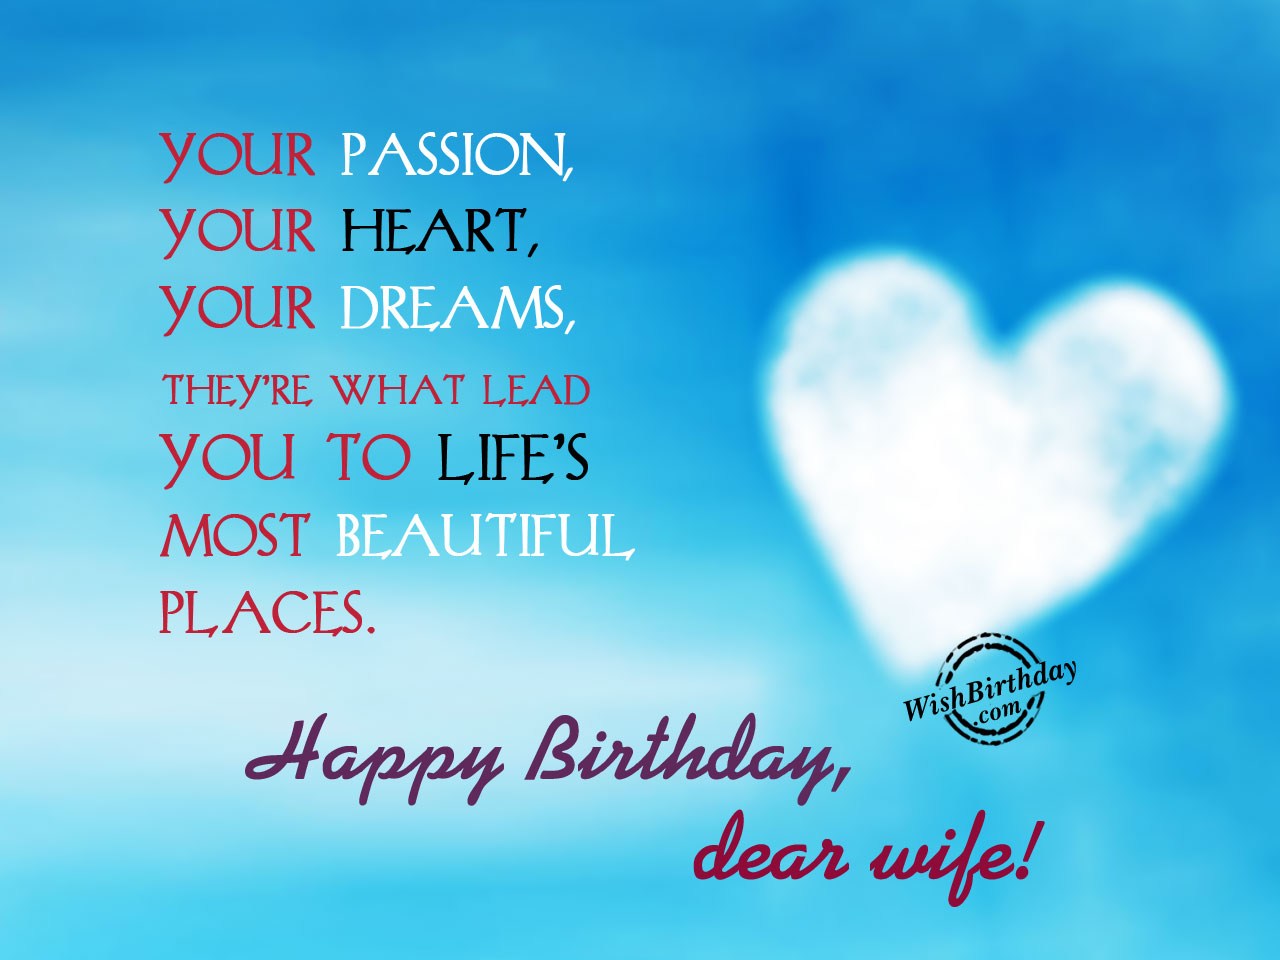 Your passion your heart - Birthday Wishes, Happy Birthday Pictures